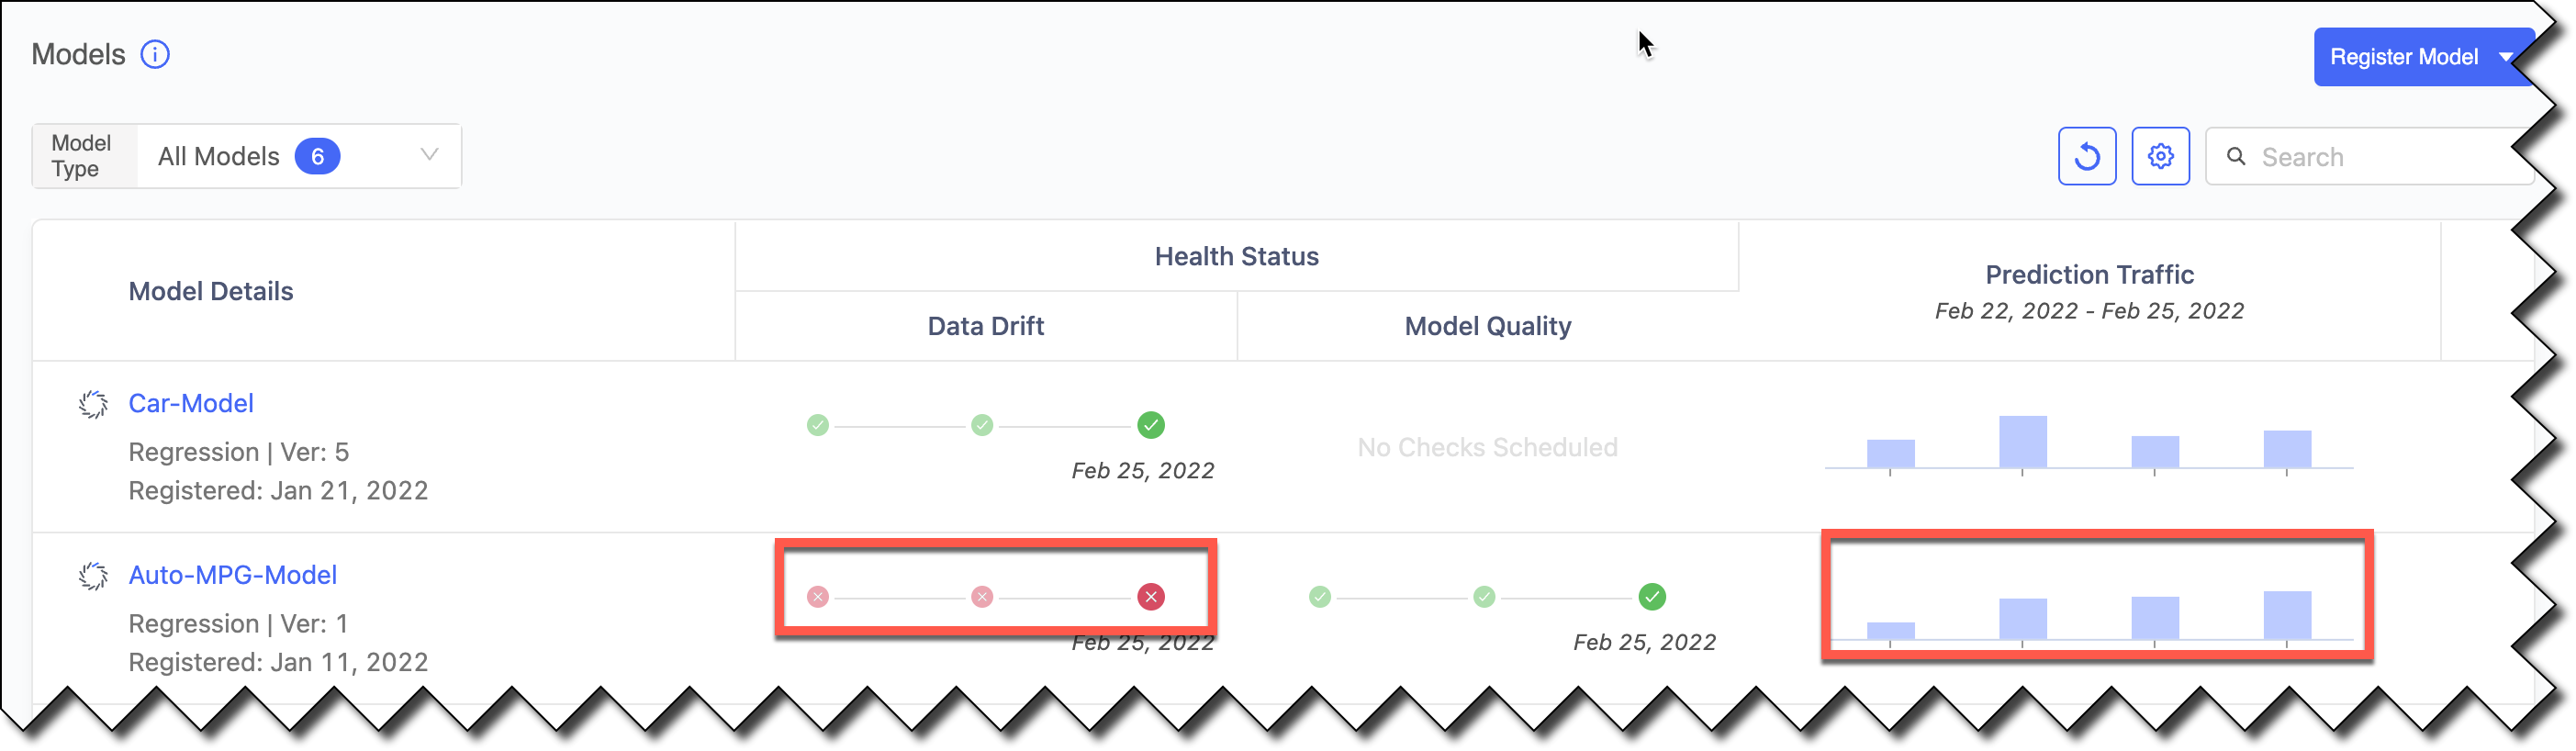 The Health Status area shows the Data  Drift and Model Quality checks